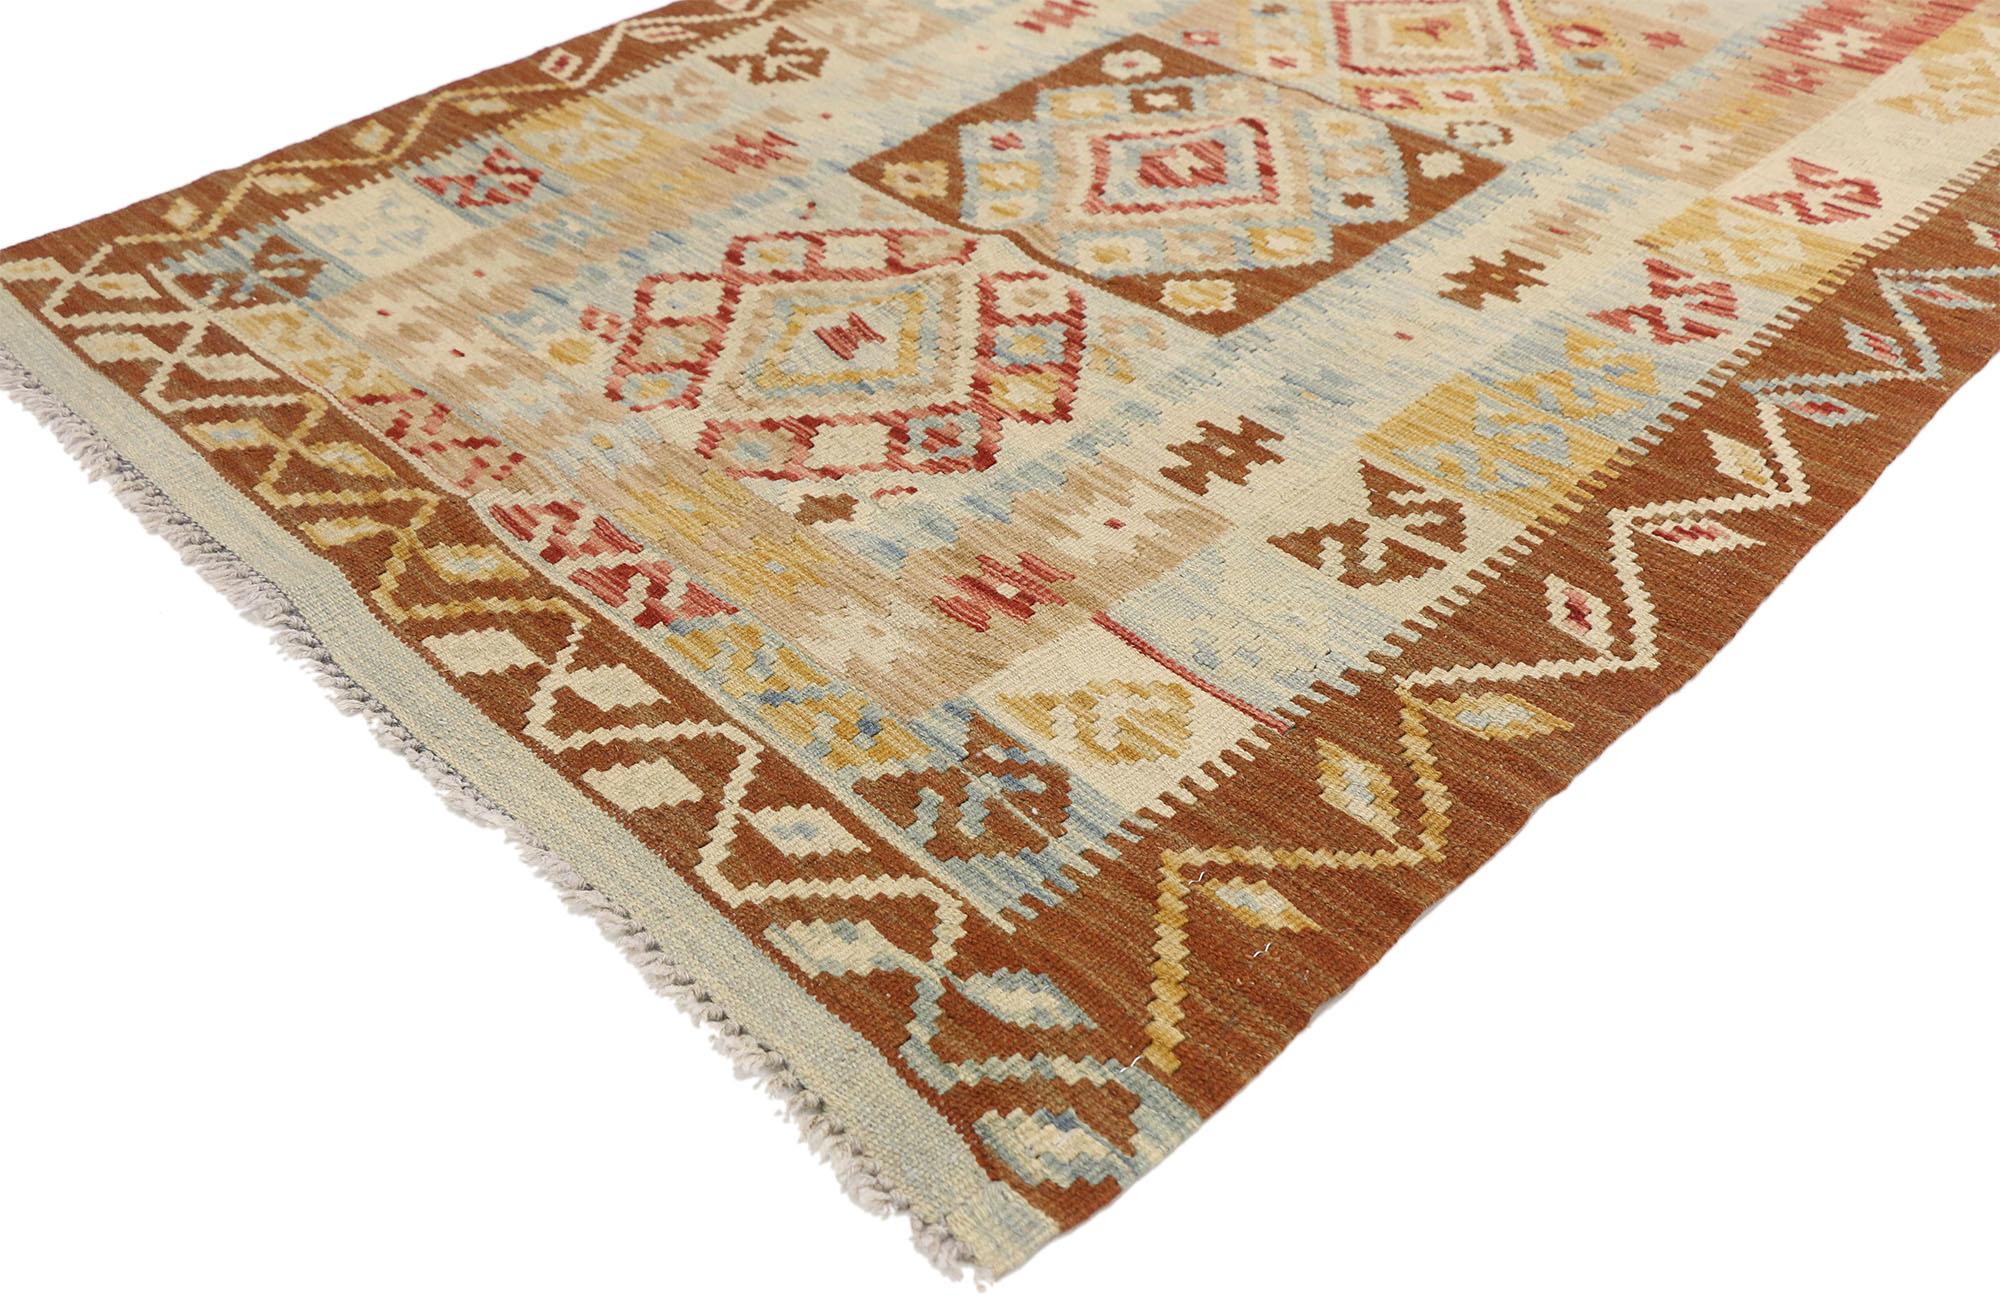 80134 Vintage Afghani Kilim rug, 03'03 x 05'05. Full of tiny details and nomadic charm, this handwoven wool vintage Afghan kilim rug is a captivating vision of woven beauty. The eye-catching tribal design and vibrant earth-tone colors woven into